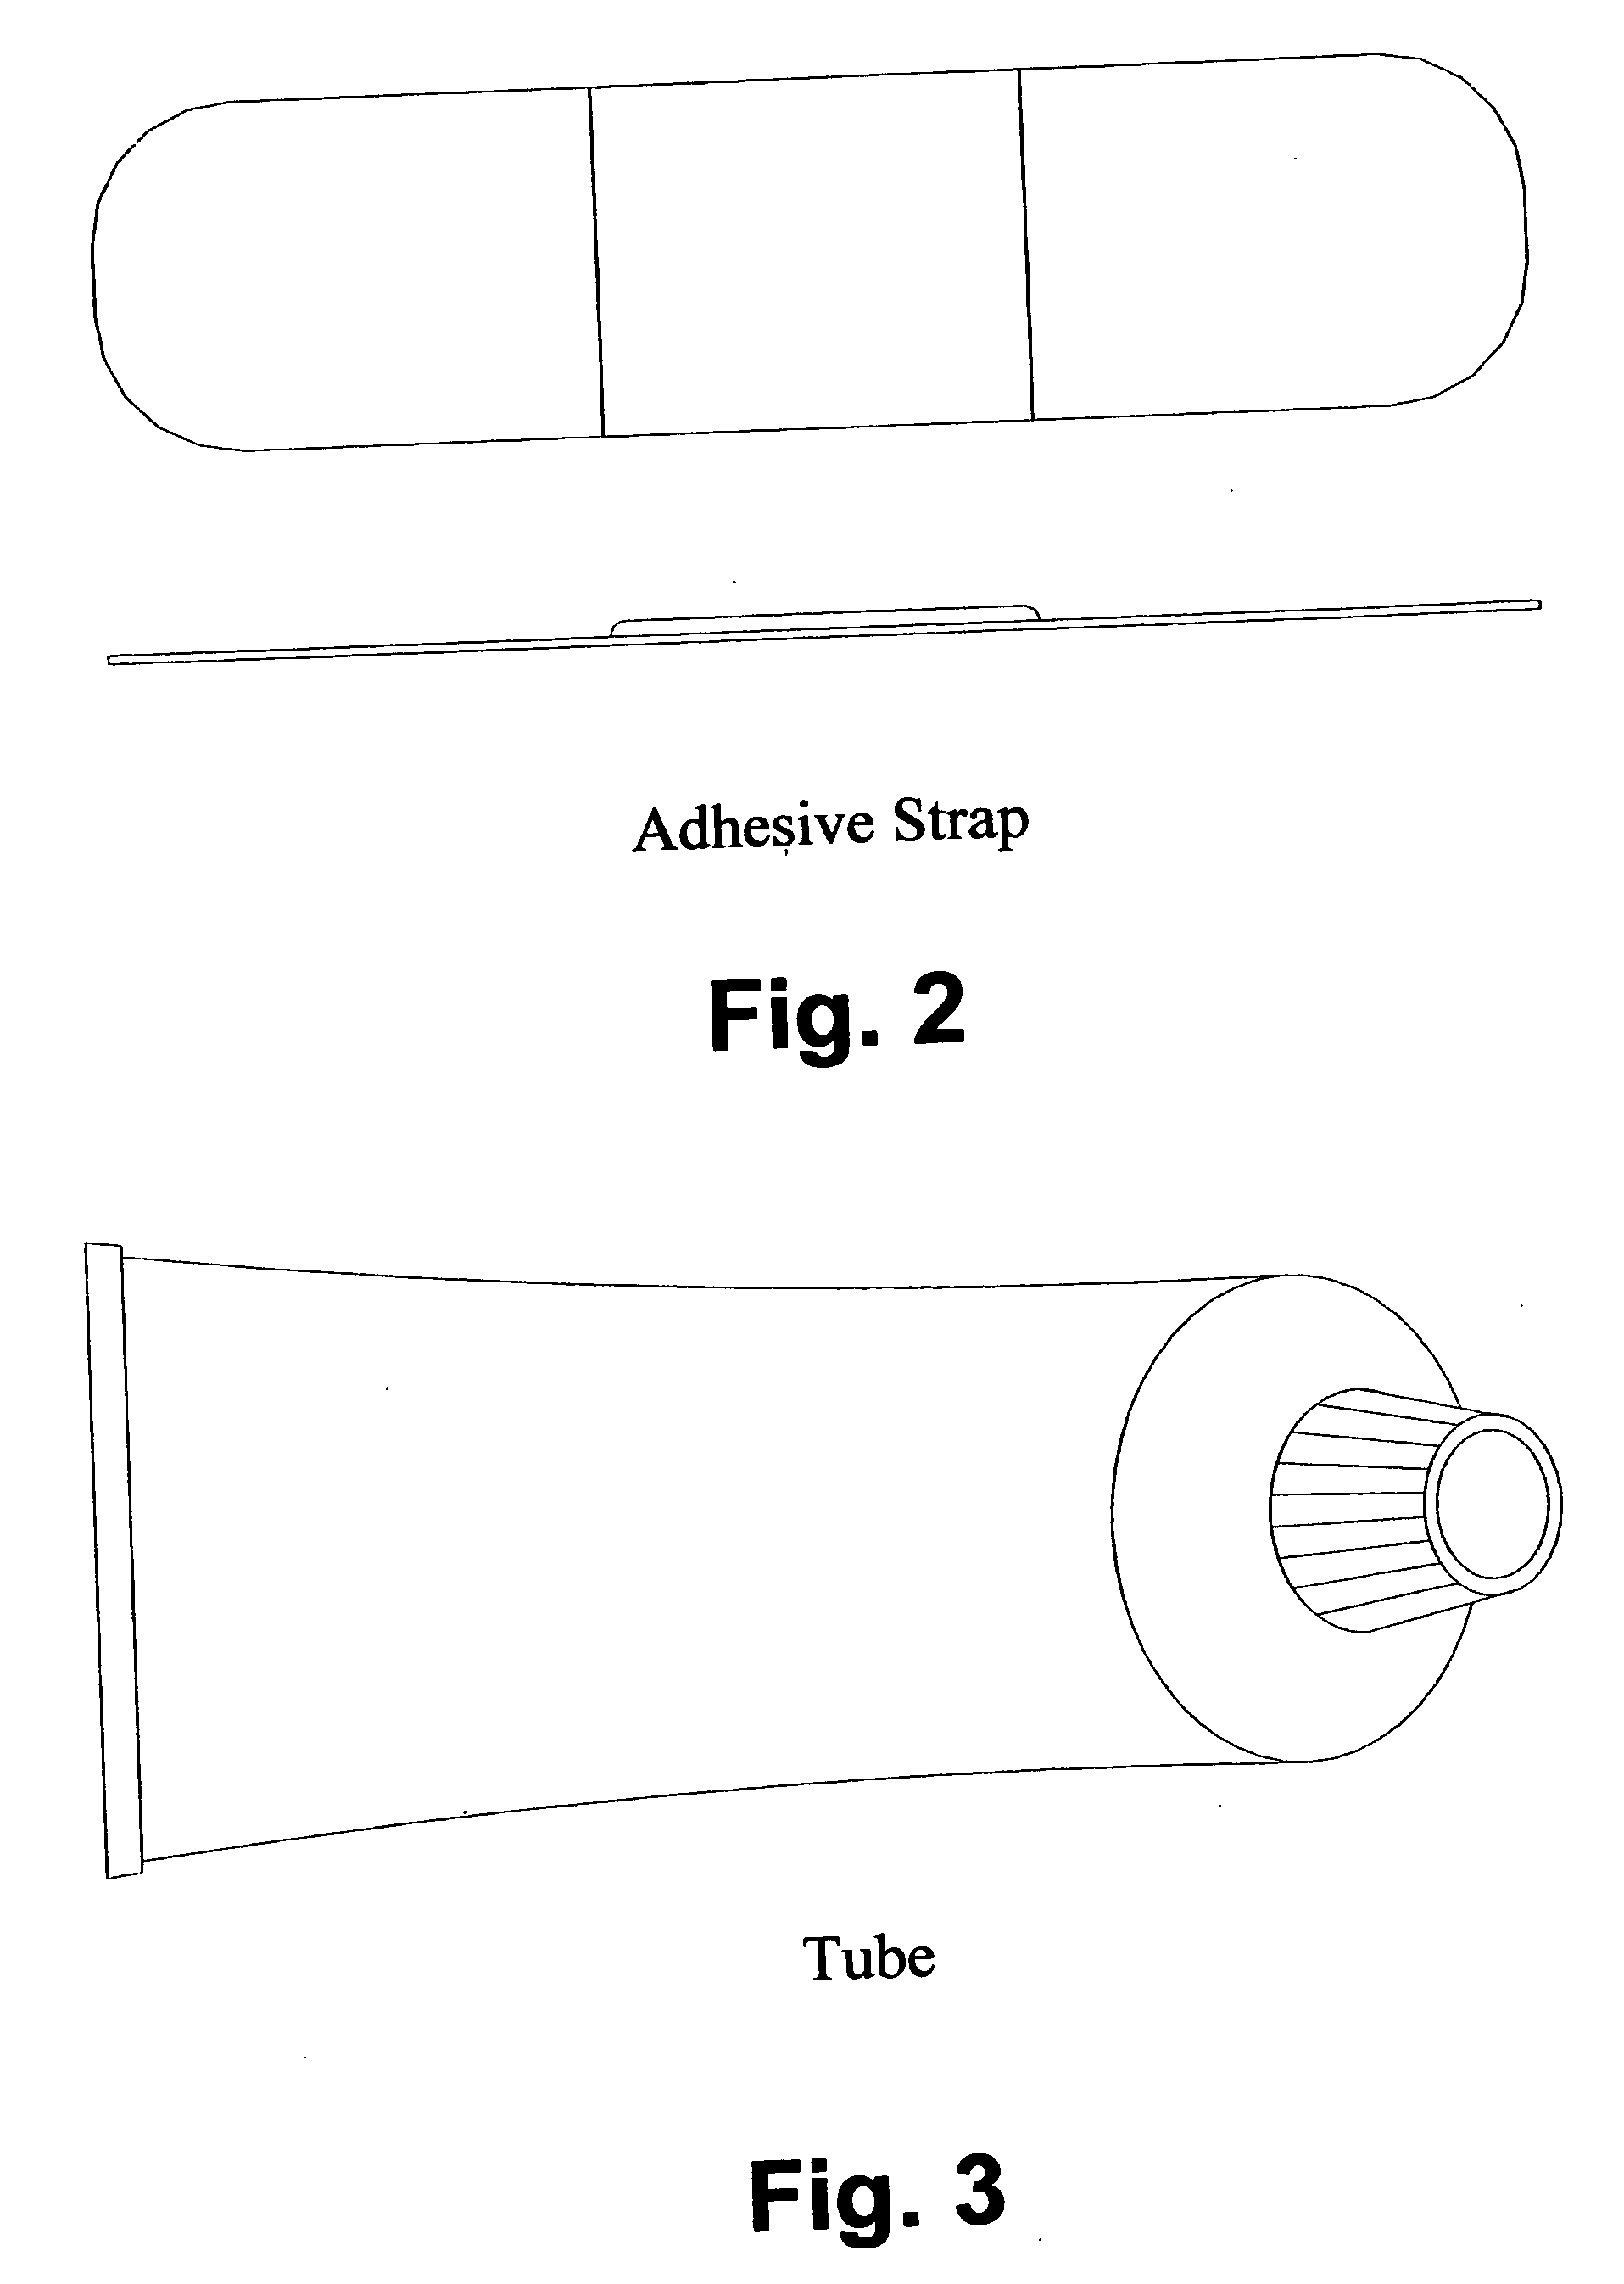 Wound dressing consisting of a biodegradable biopolymer